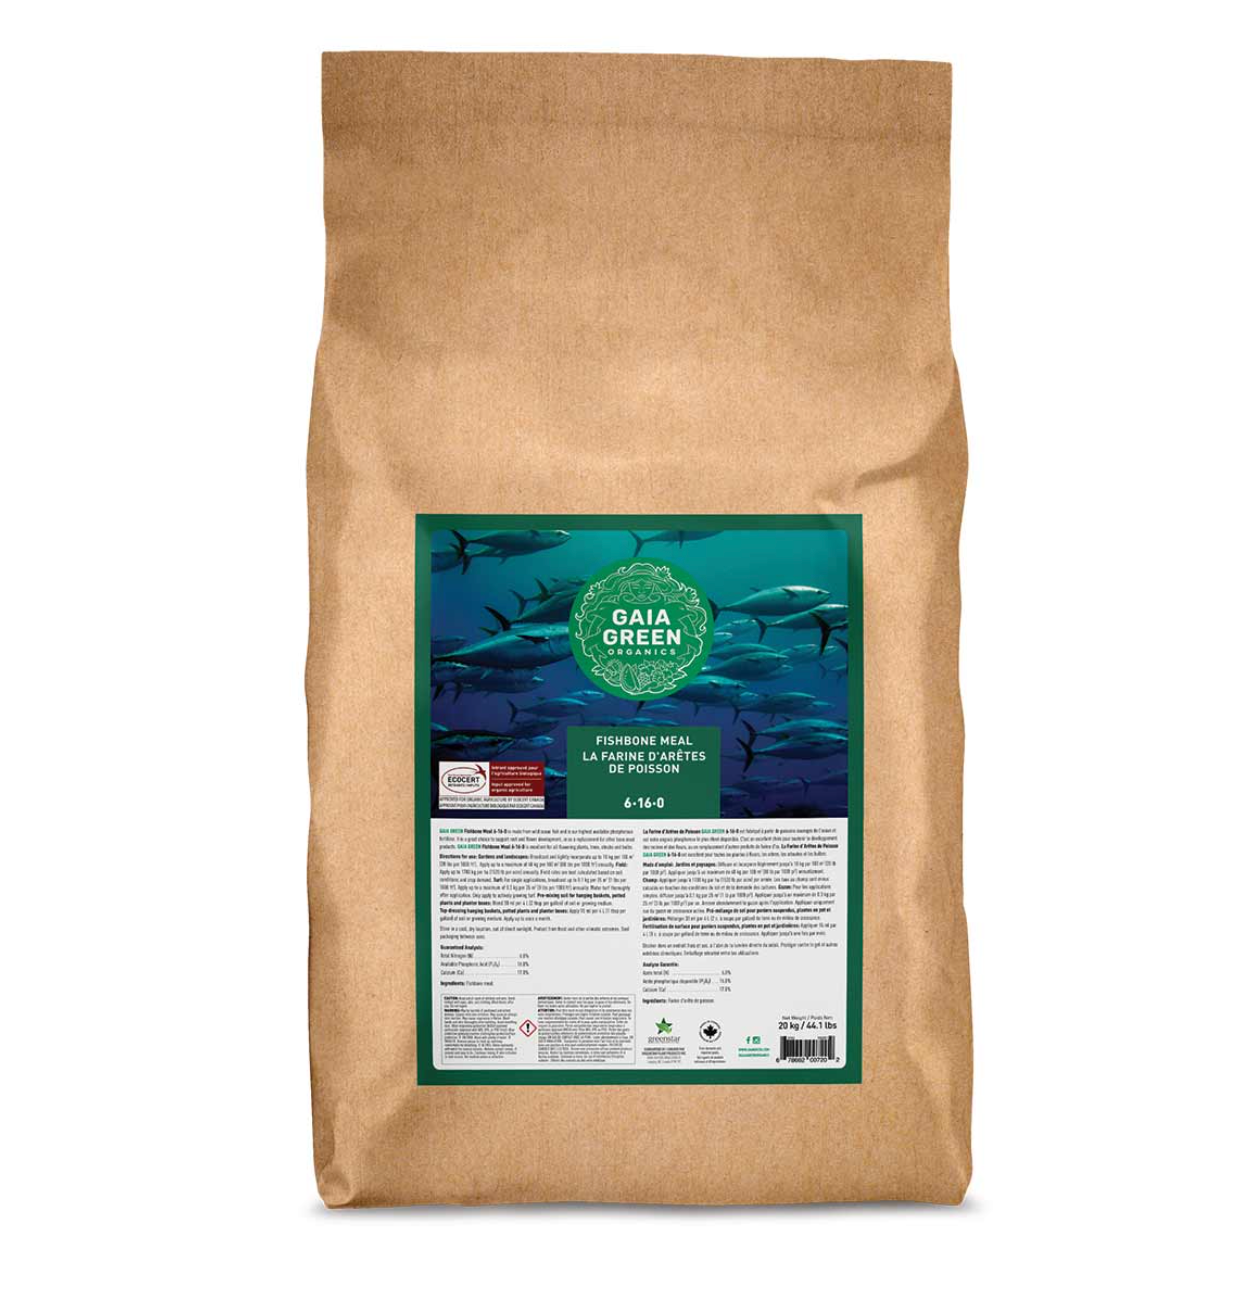 Product Image:Gaia Green Fishbone Meal (6-18-0) 20KG